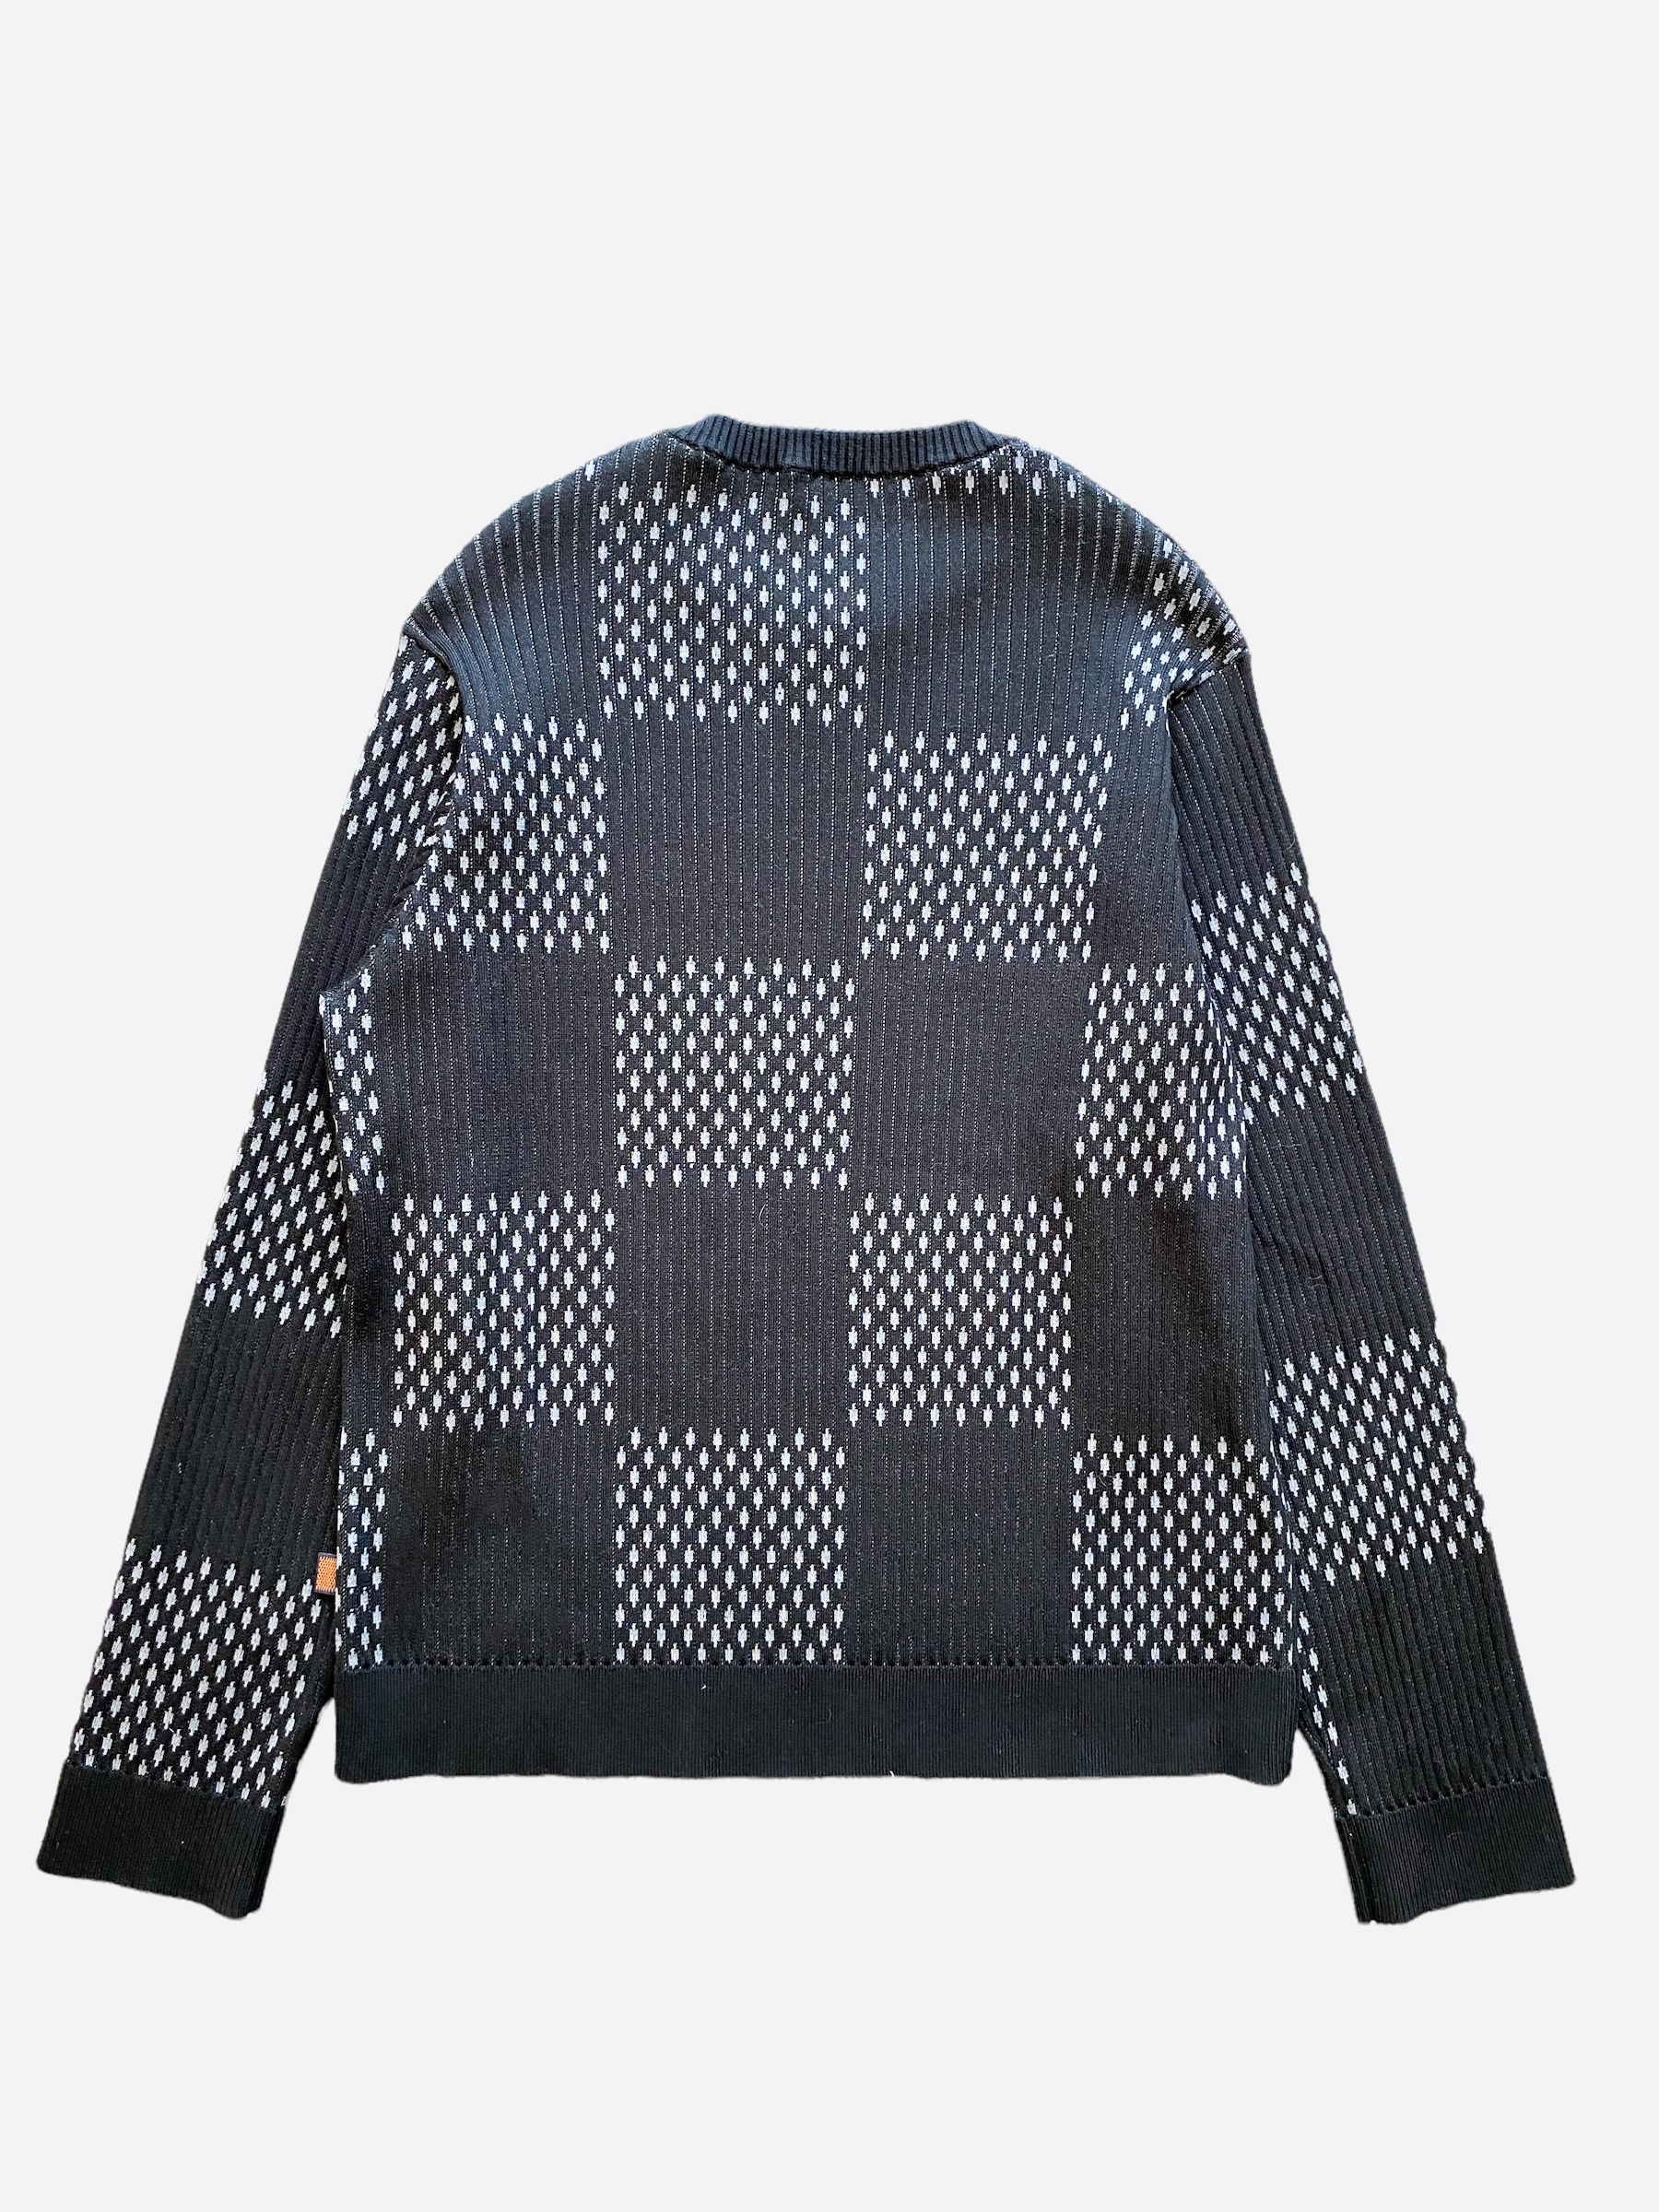 Louis Vuitton Distorted Giant Damier Sweater